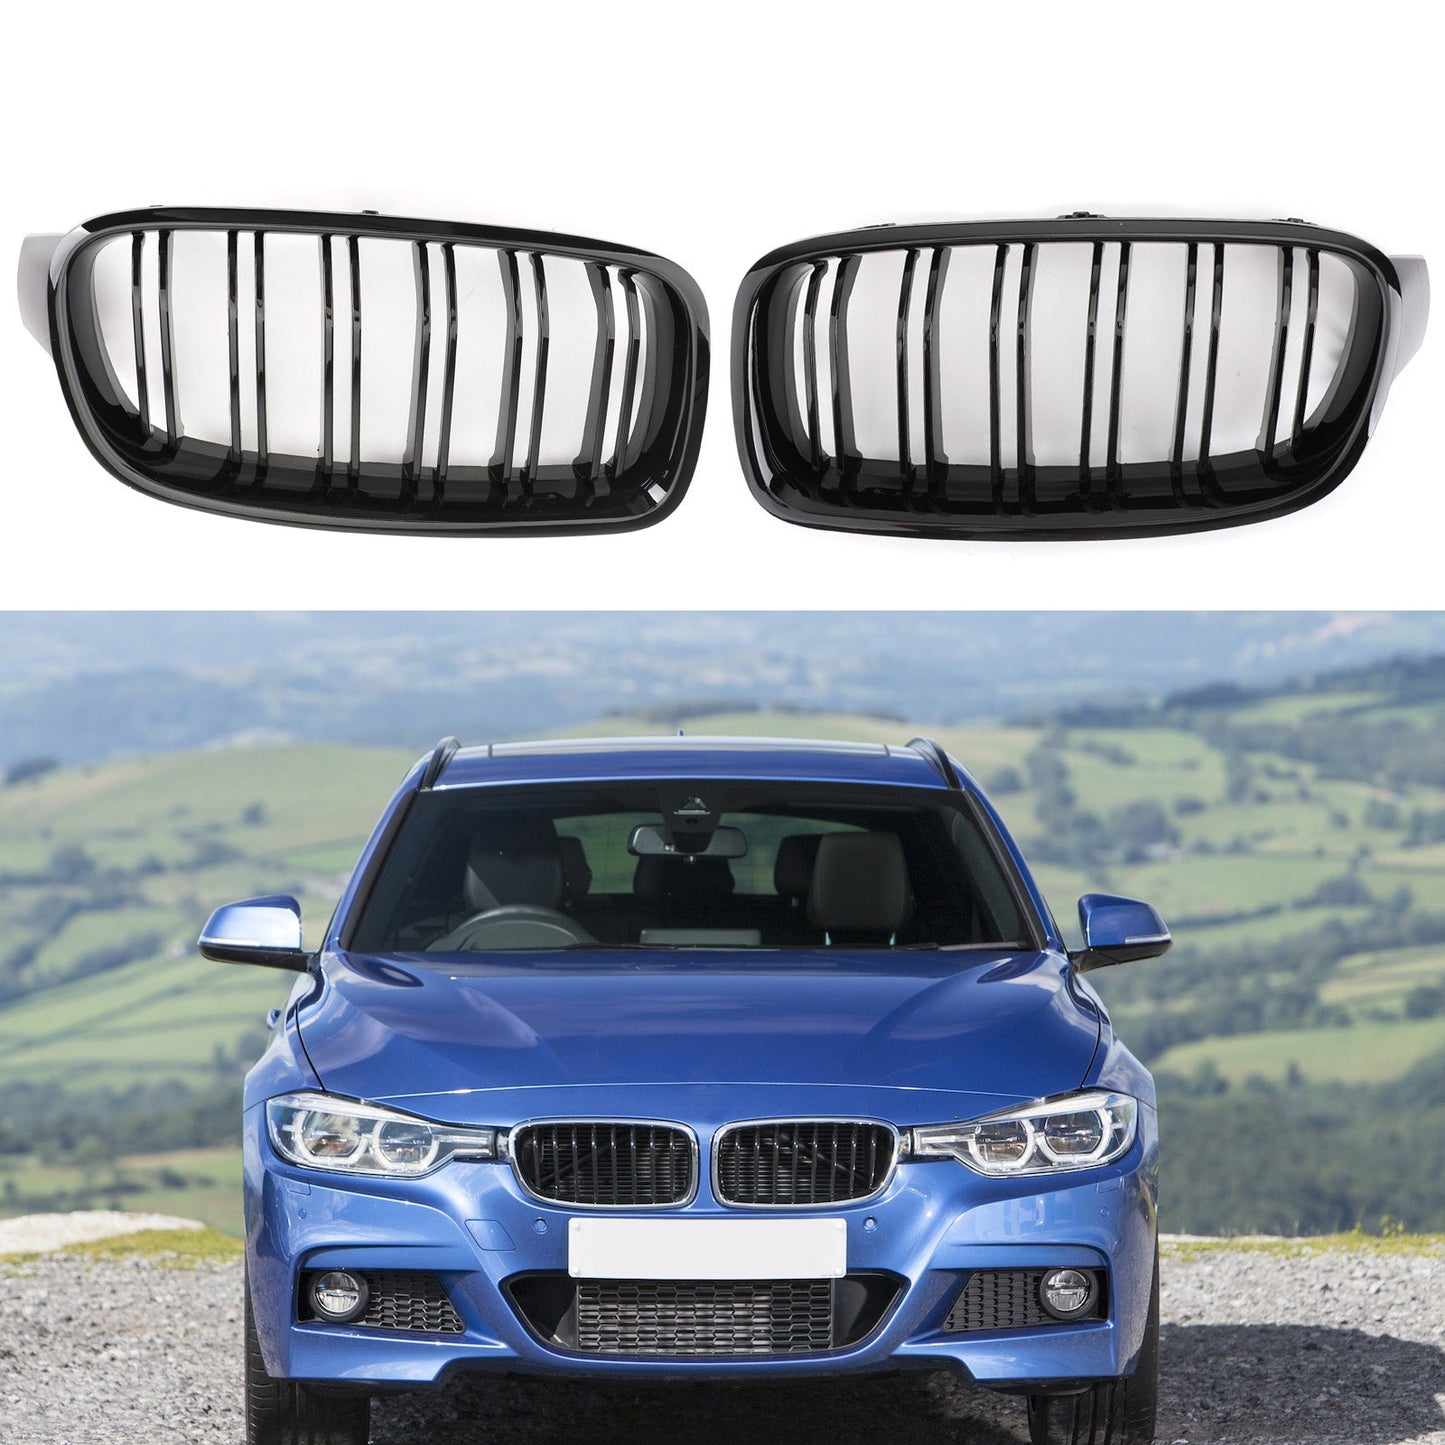 Gloss Black Front Kidney Grille Fit BMW 3 Series F30 F35 2012-2017 Dual Slats